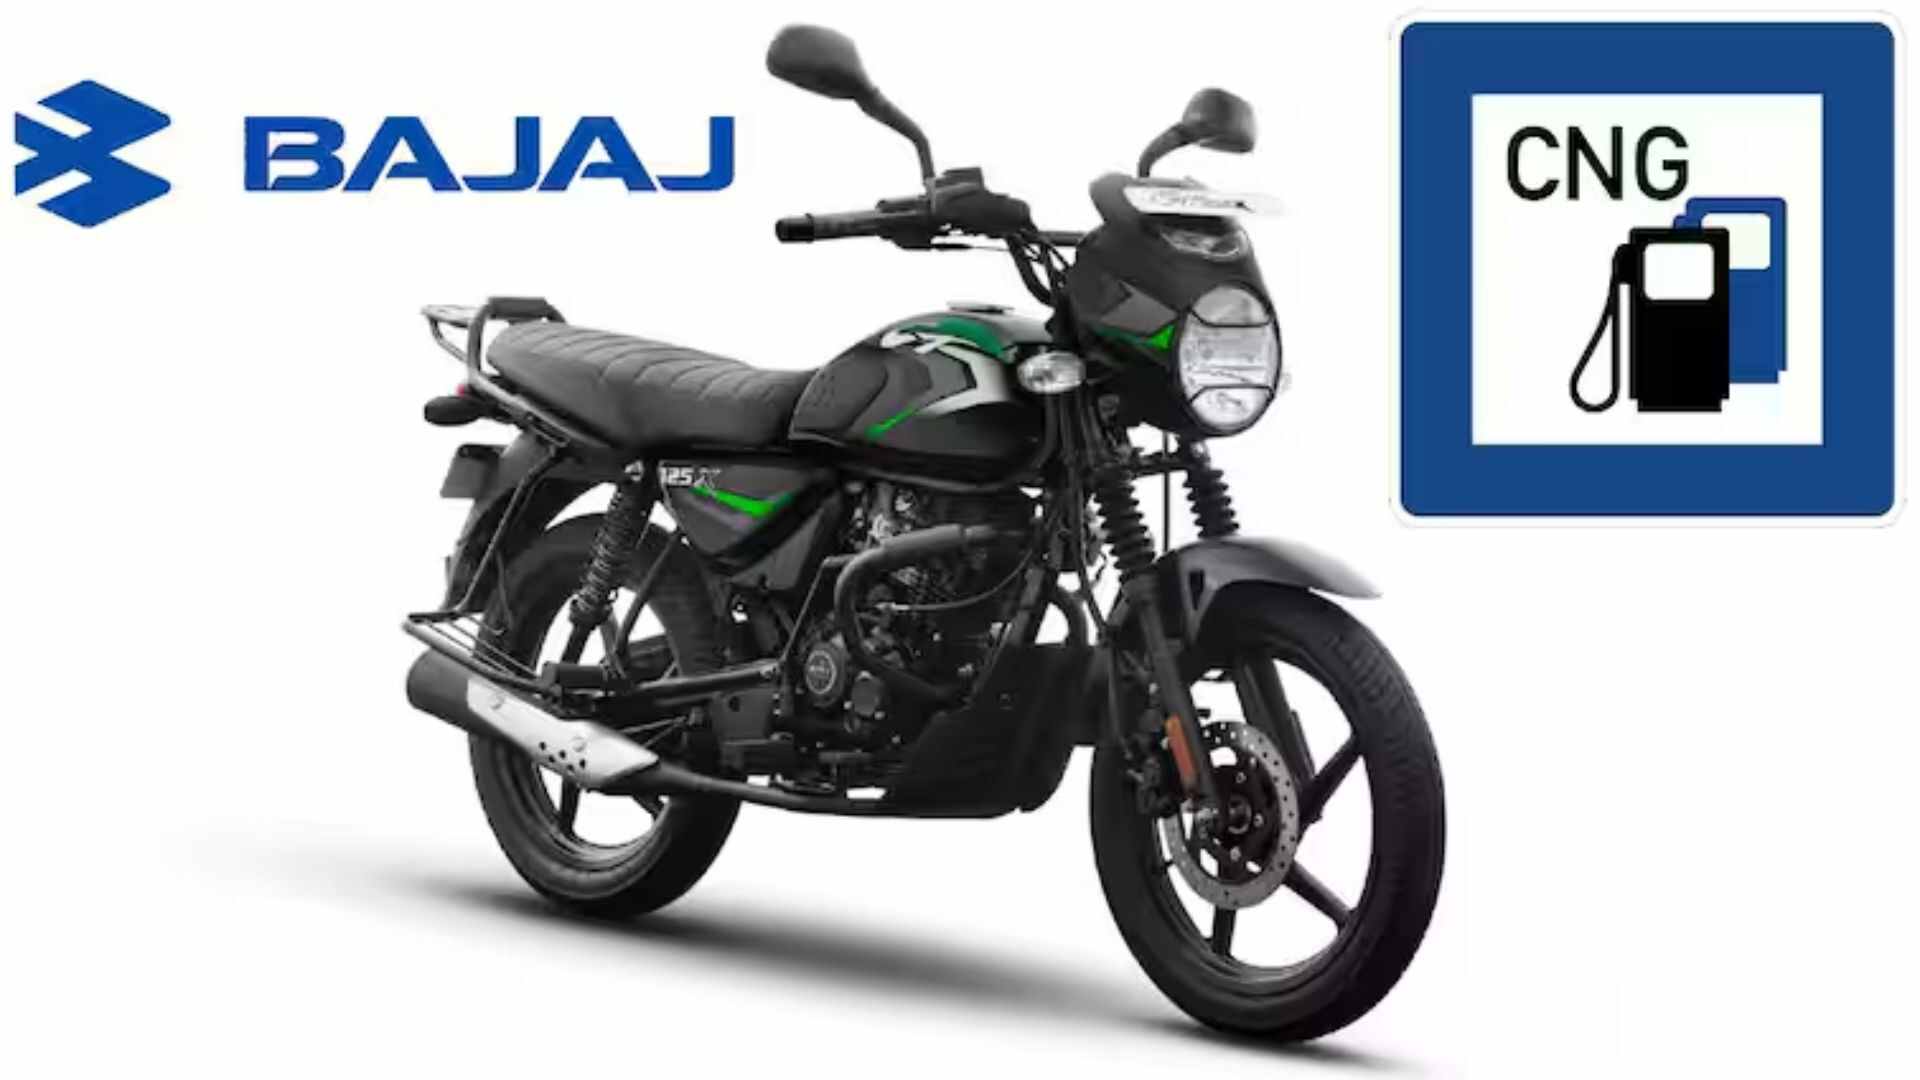 Bajaj Debuts World's First CNG Motorcycle On July 5